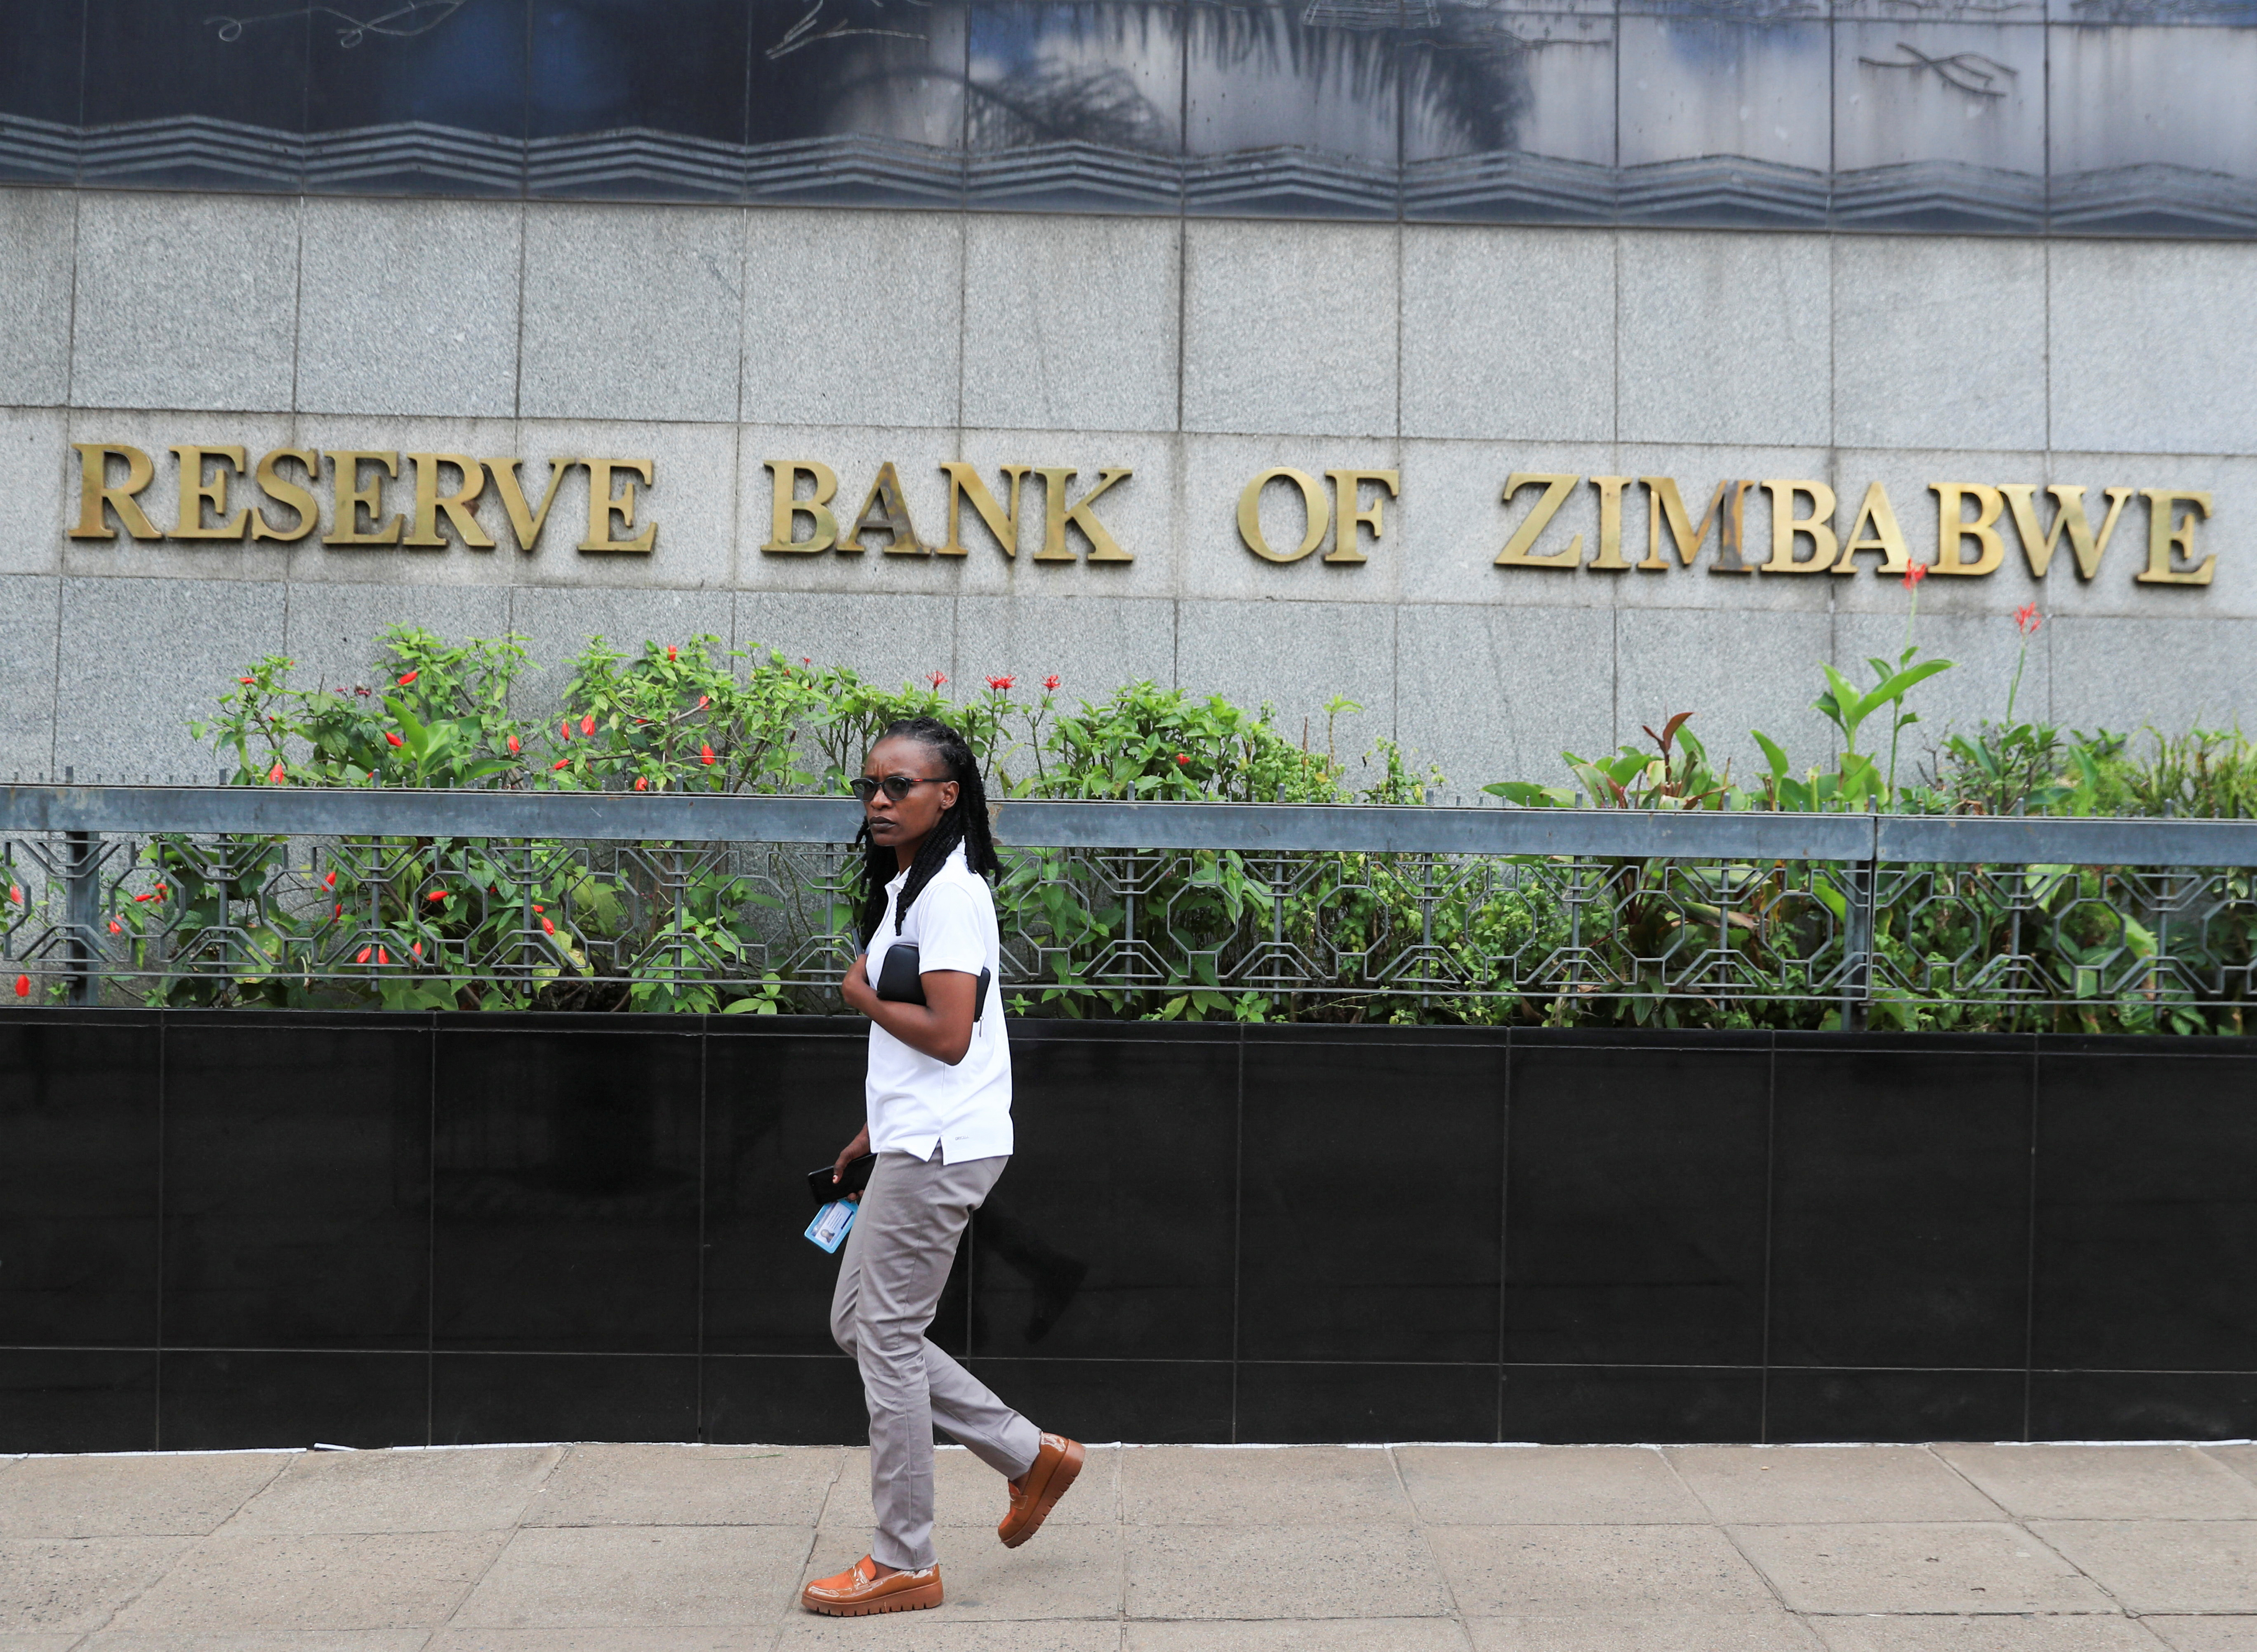 A woman walks past the Reserve Bank of Zimbabwe building in Harare